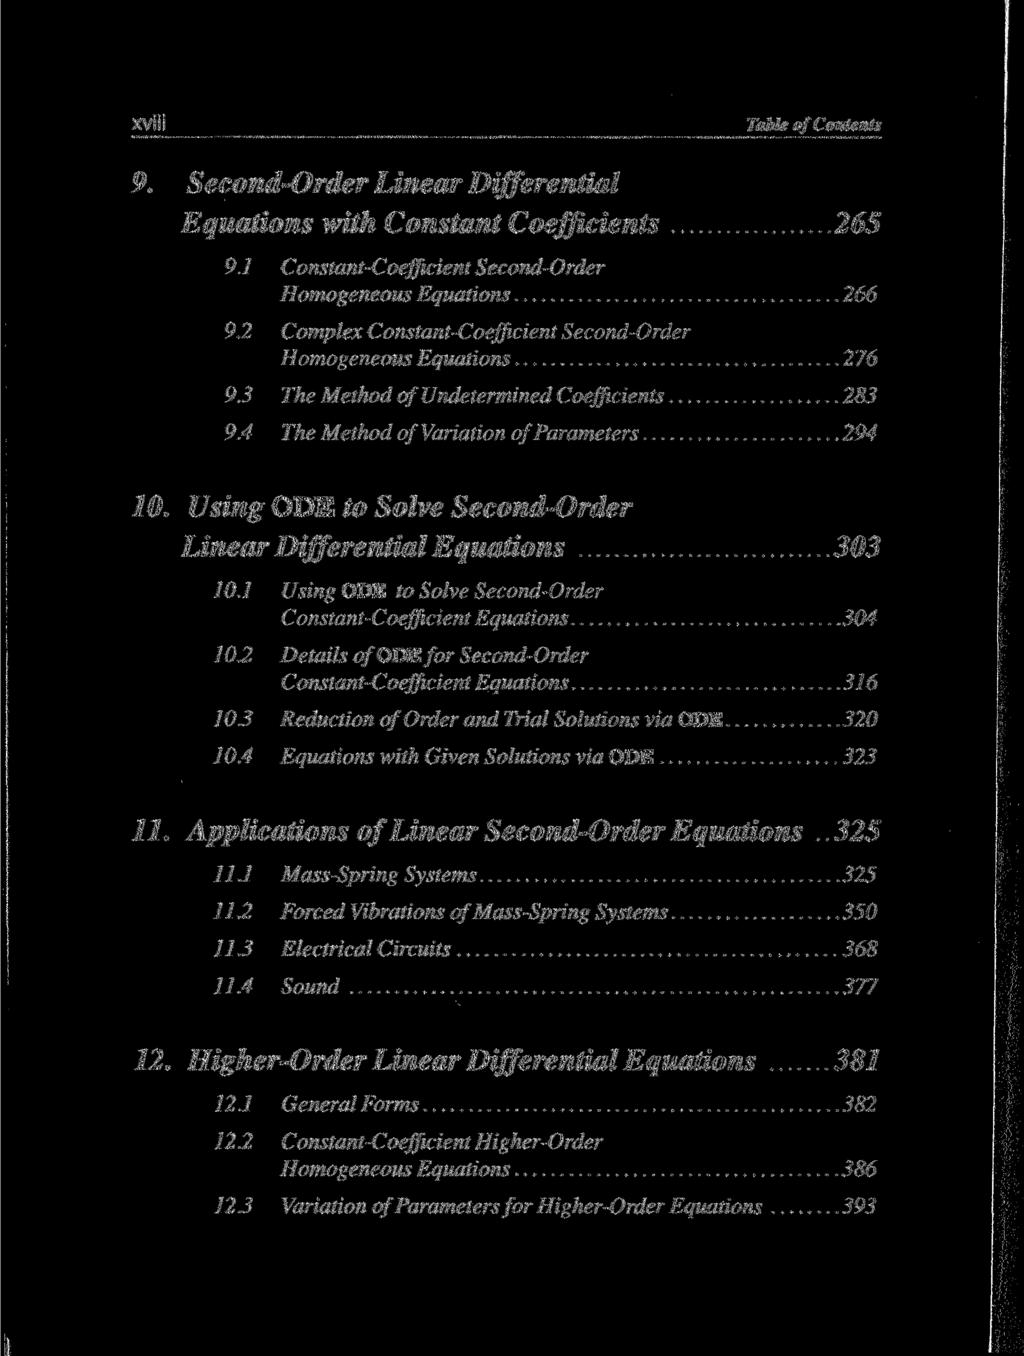 XVIII Table of Contents 9. Second-Order Linear Differential Equations with Constant Coefficients 265 9.1 Constant-Coefficient Second-Order Homogeneous Equations 266 9.